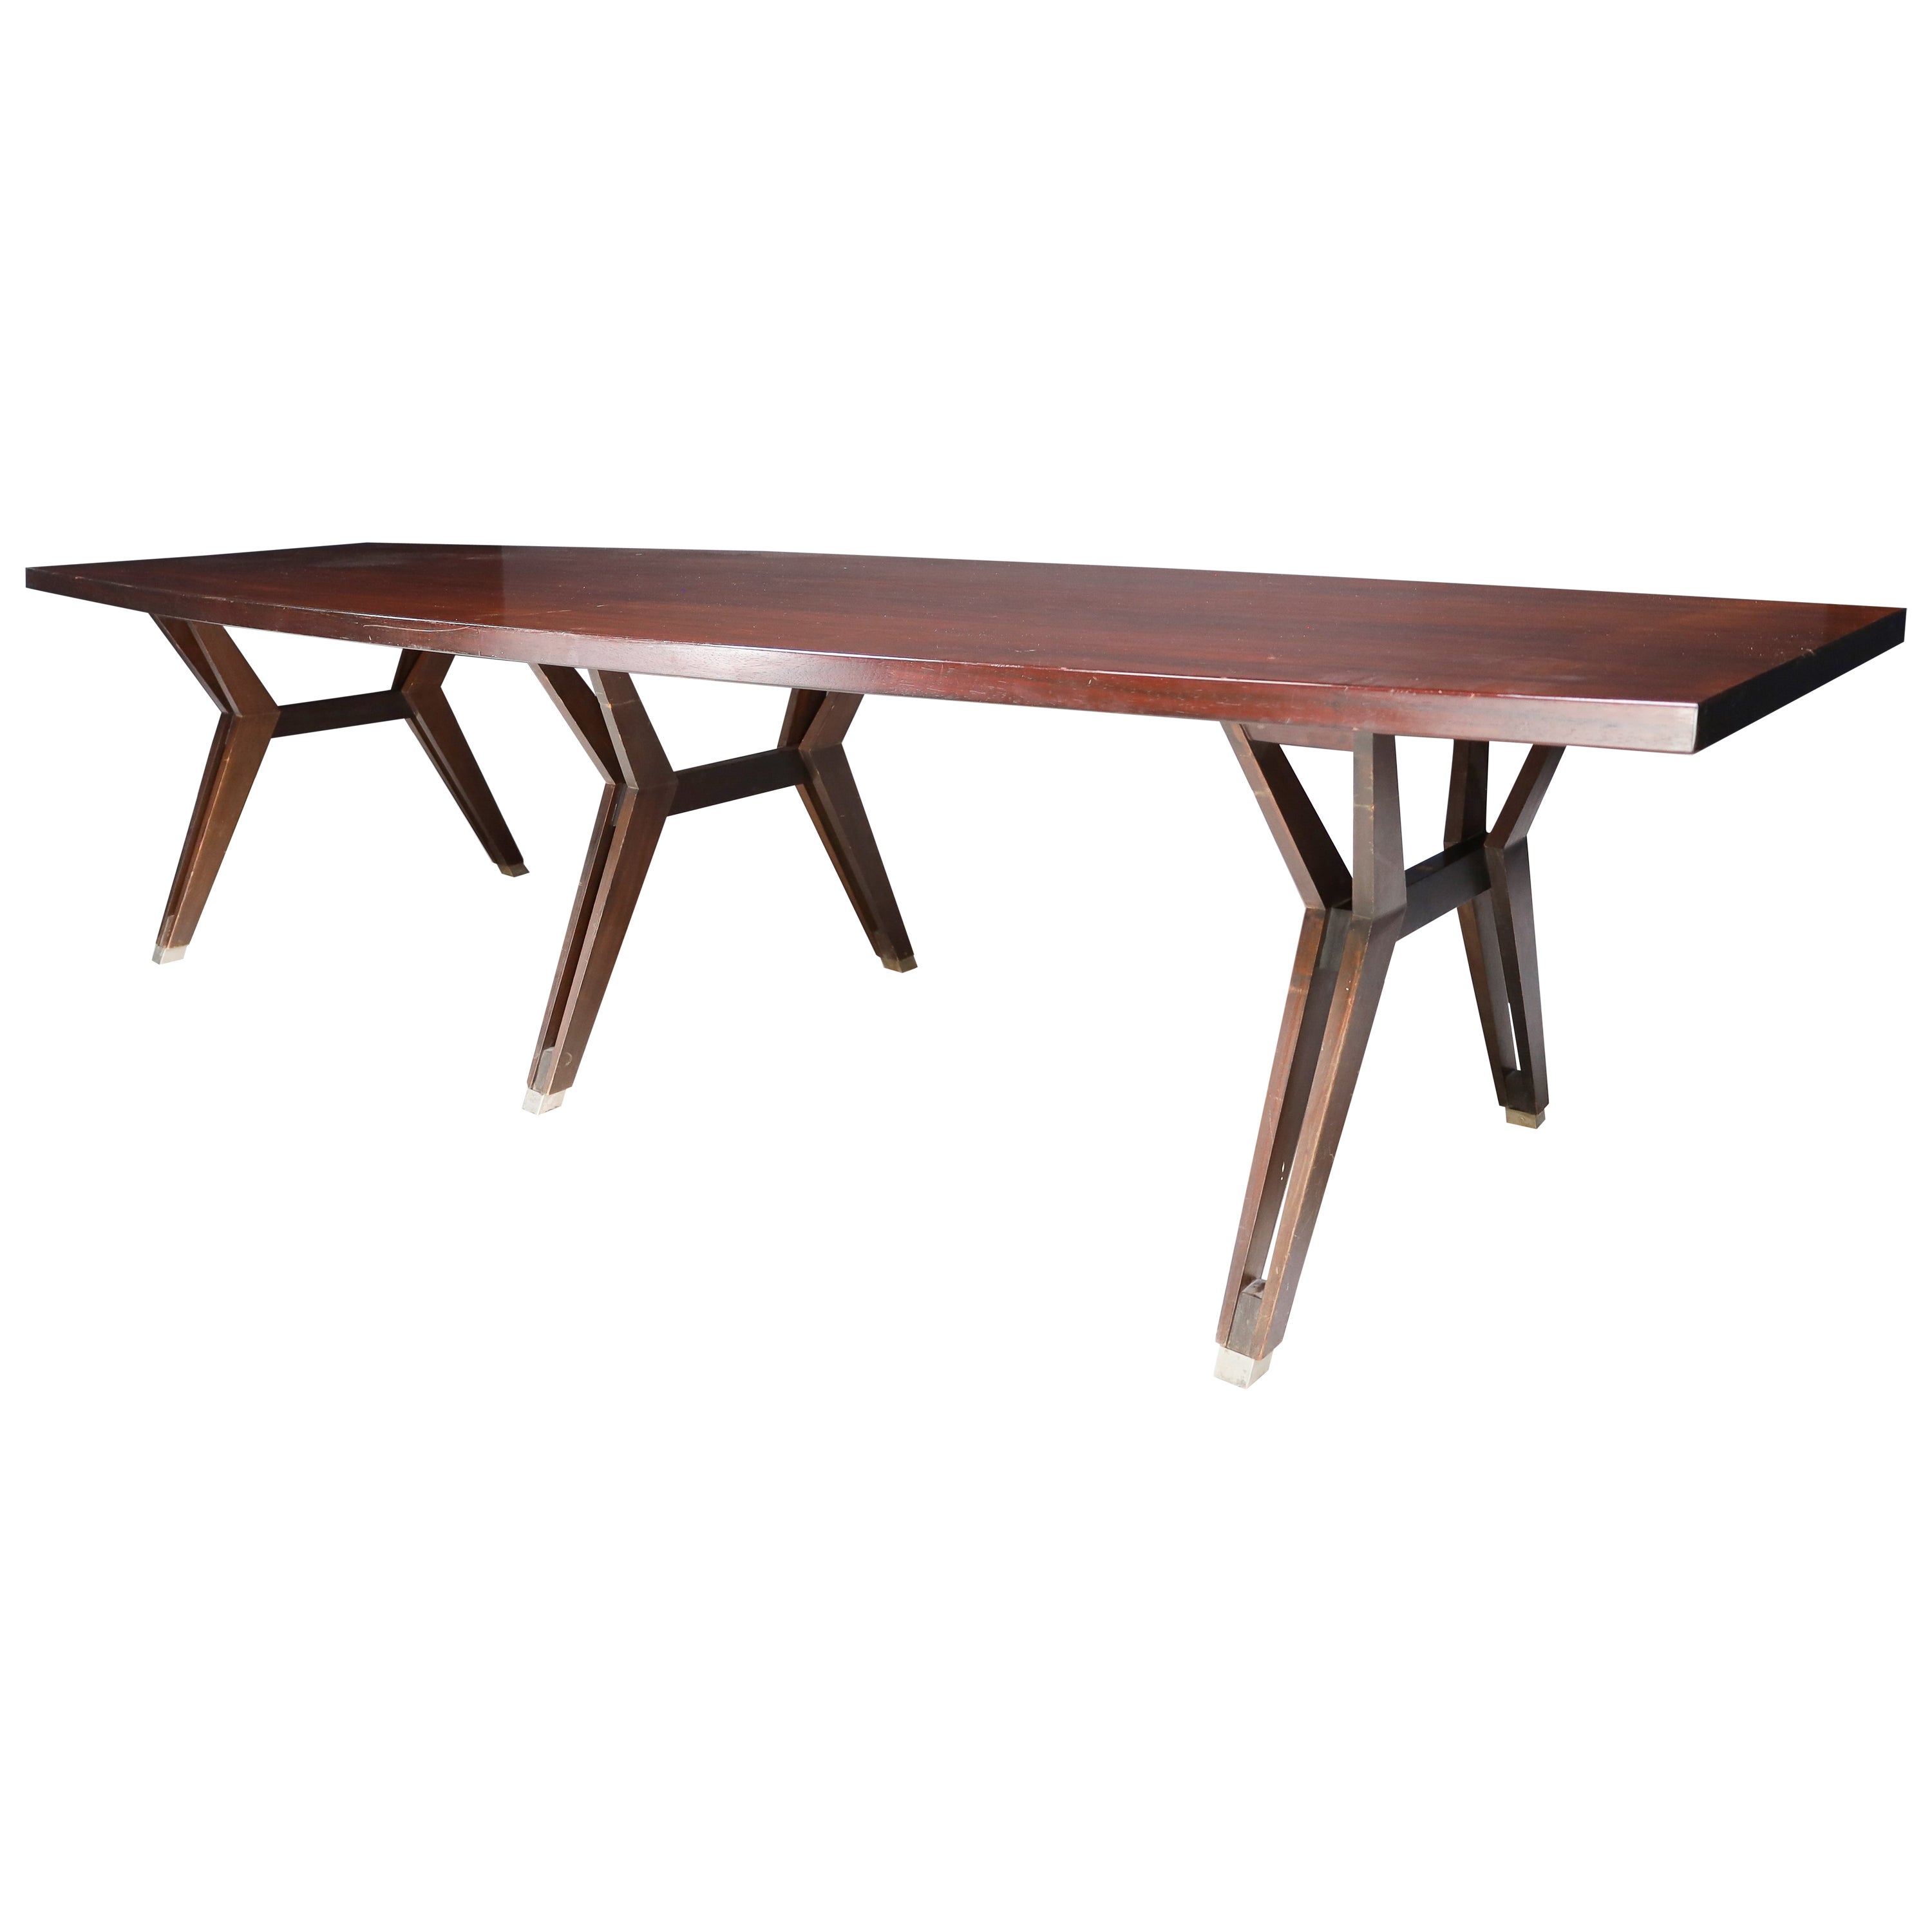 Ico Parisi for MIM Roma XL Large Dining Room Table, Italy 1950. For Sale